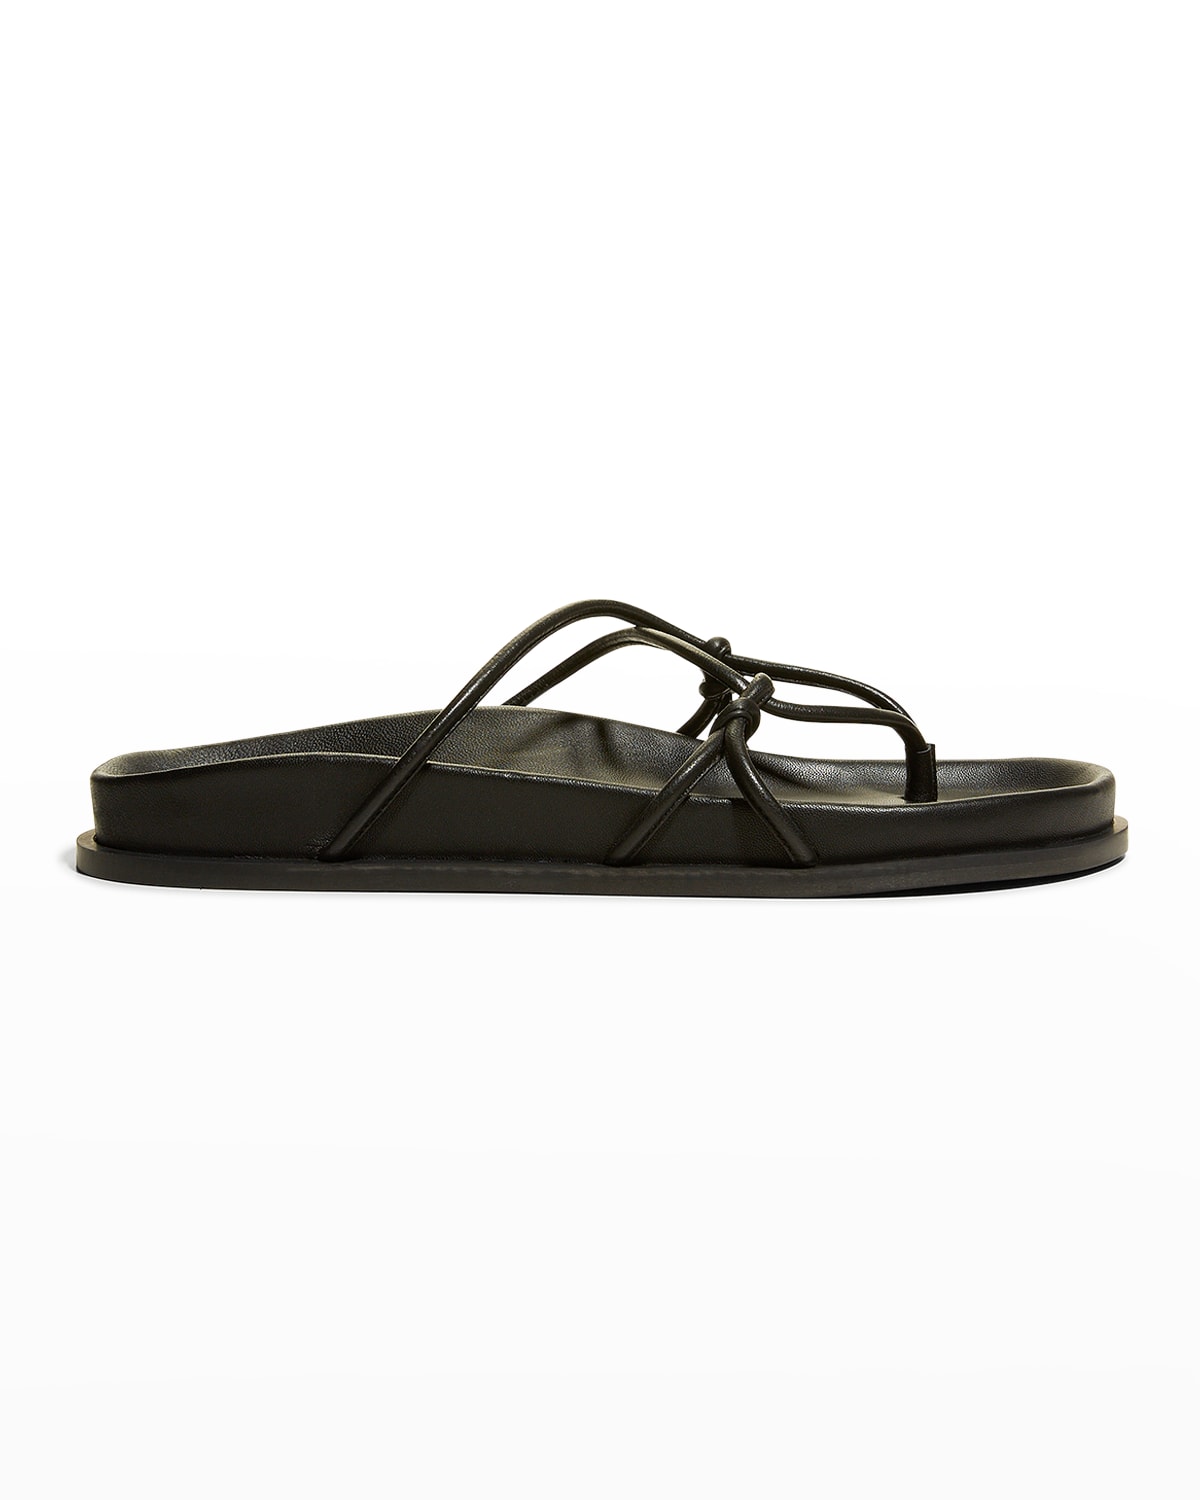 A. Emery Joesph Knotted Leather Thong Sandals